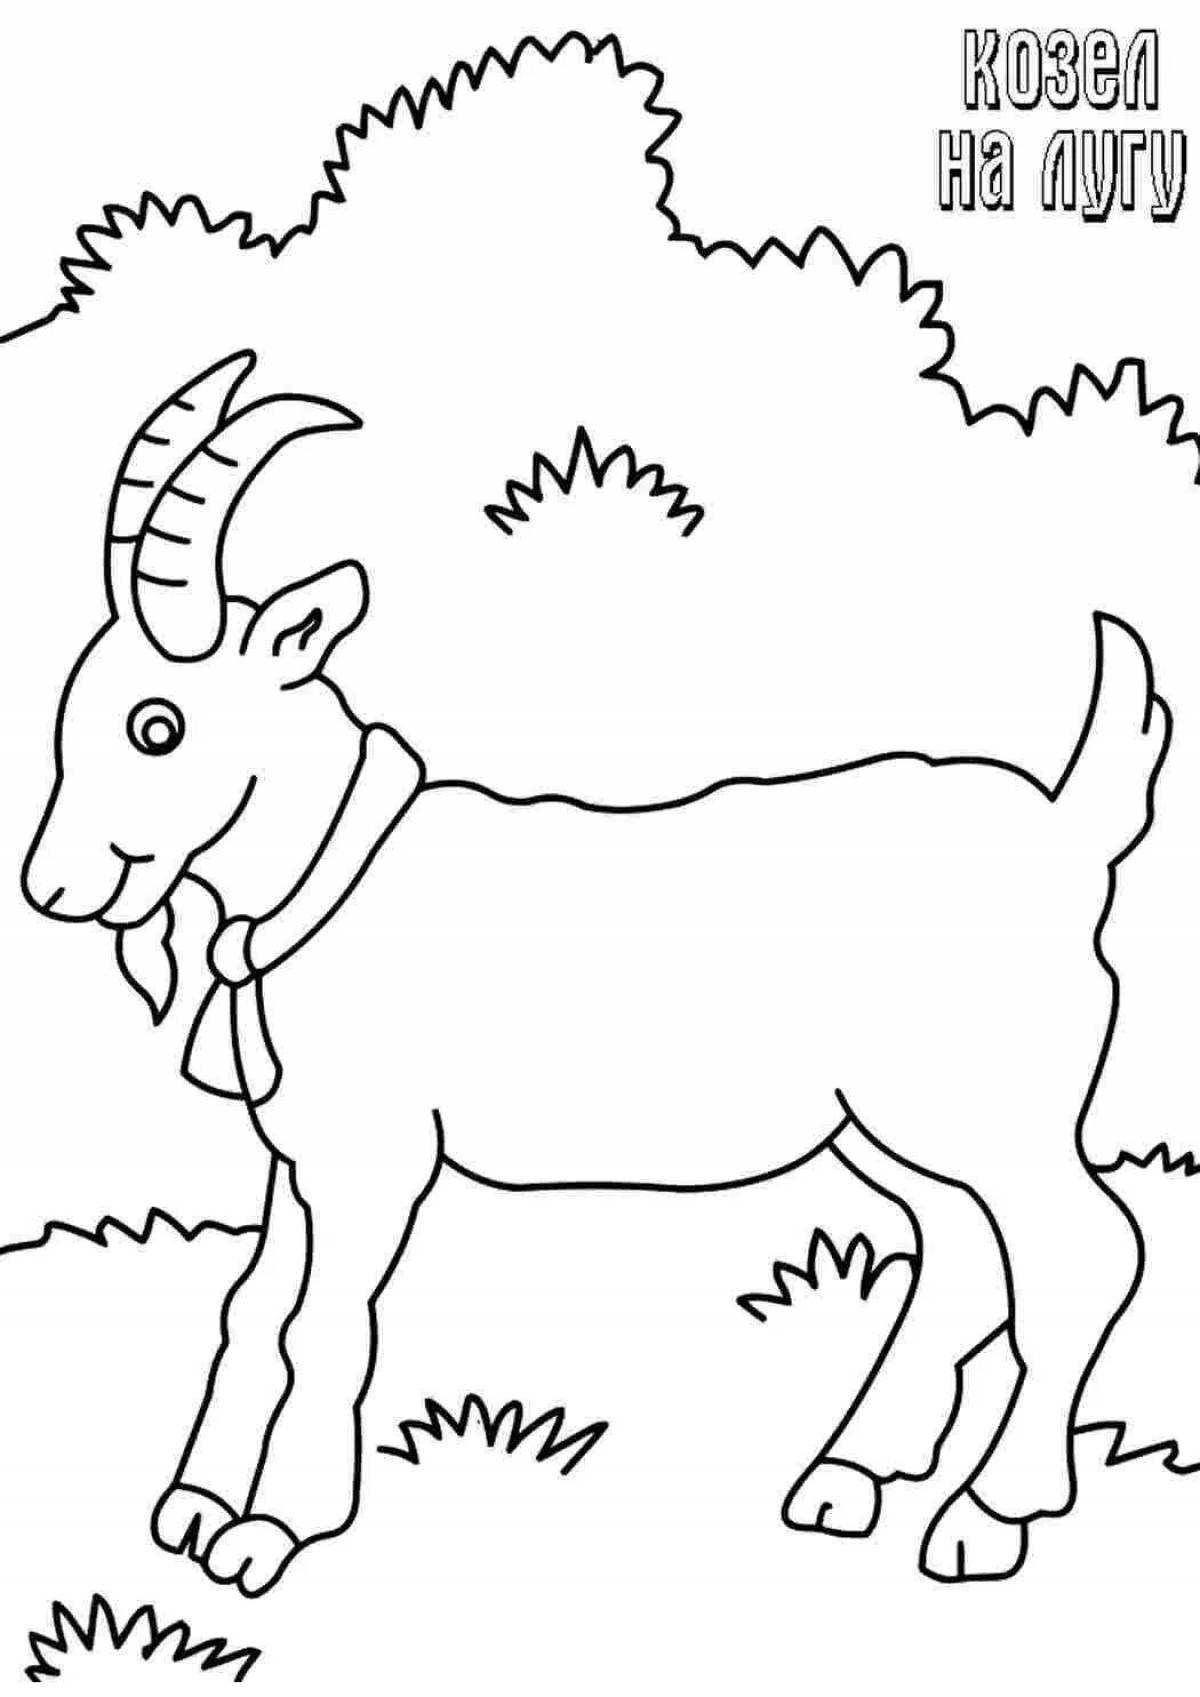 A fun goat coloring book for 5-6 year olds